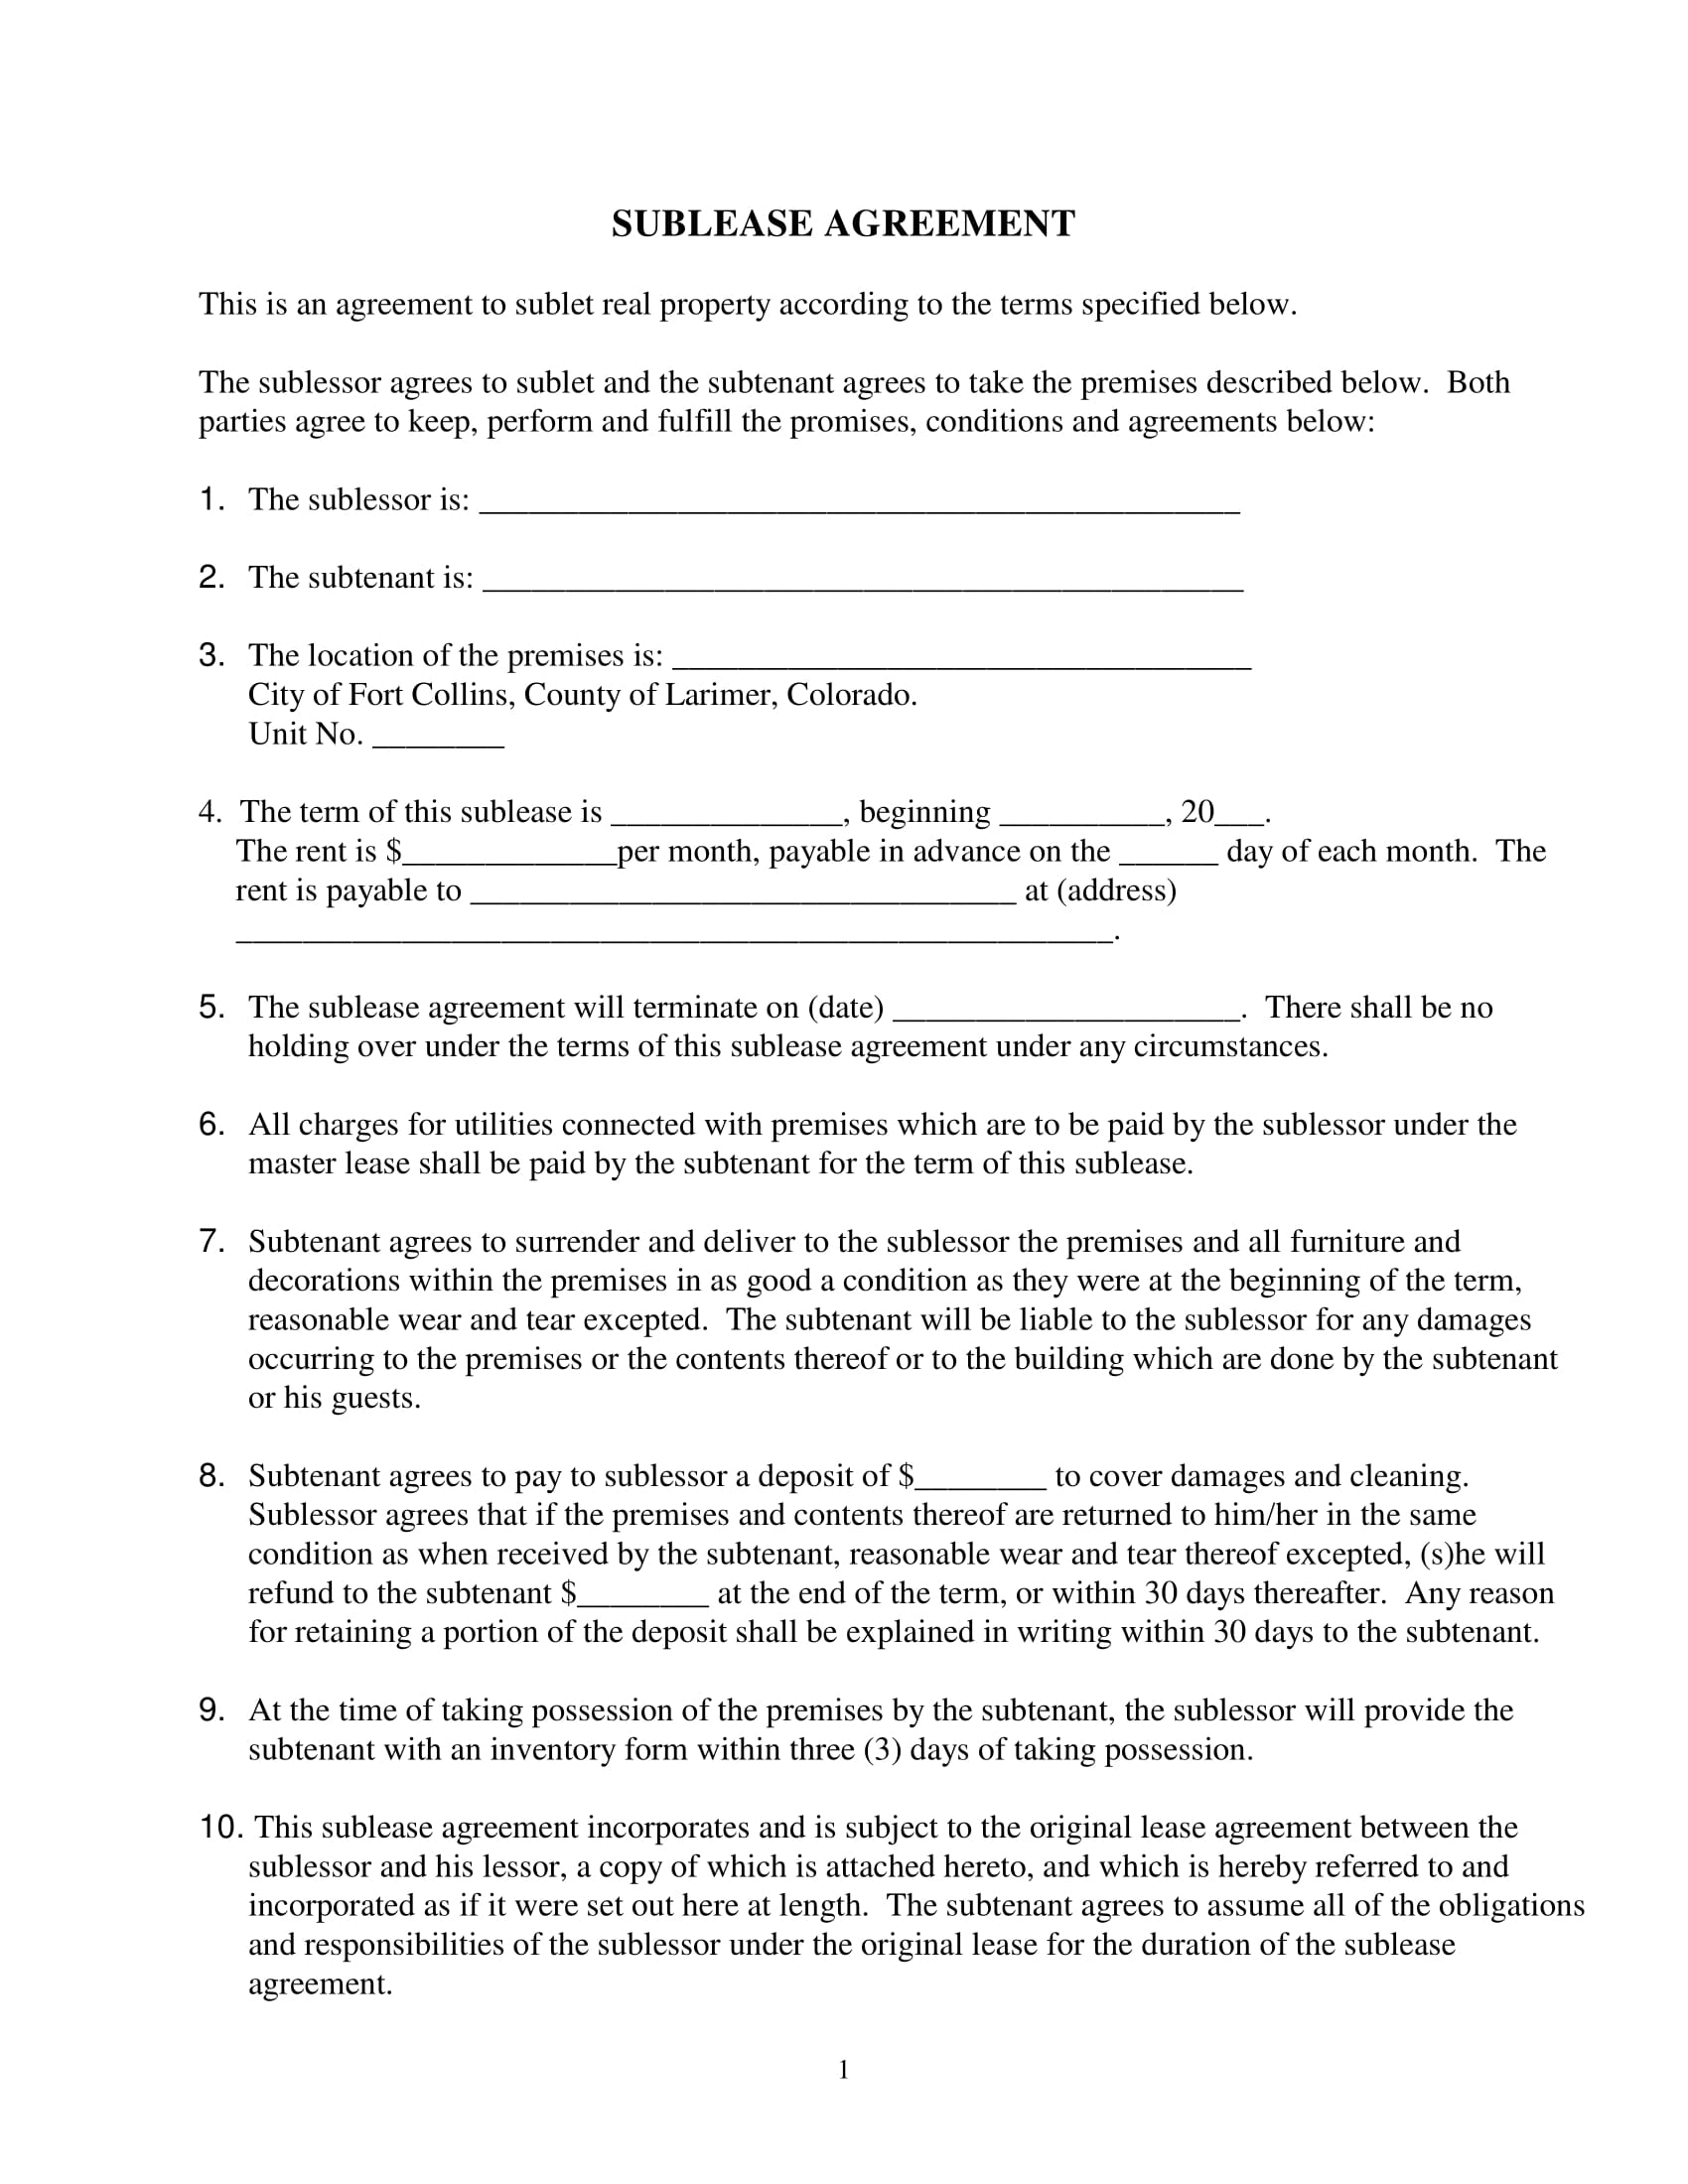 sublease agreement example1